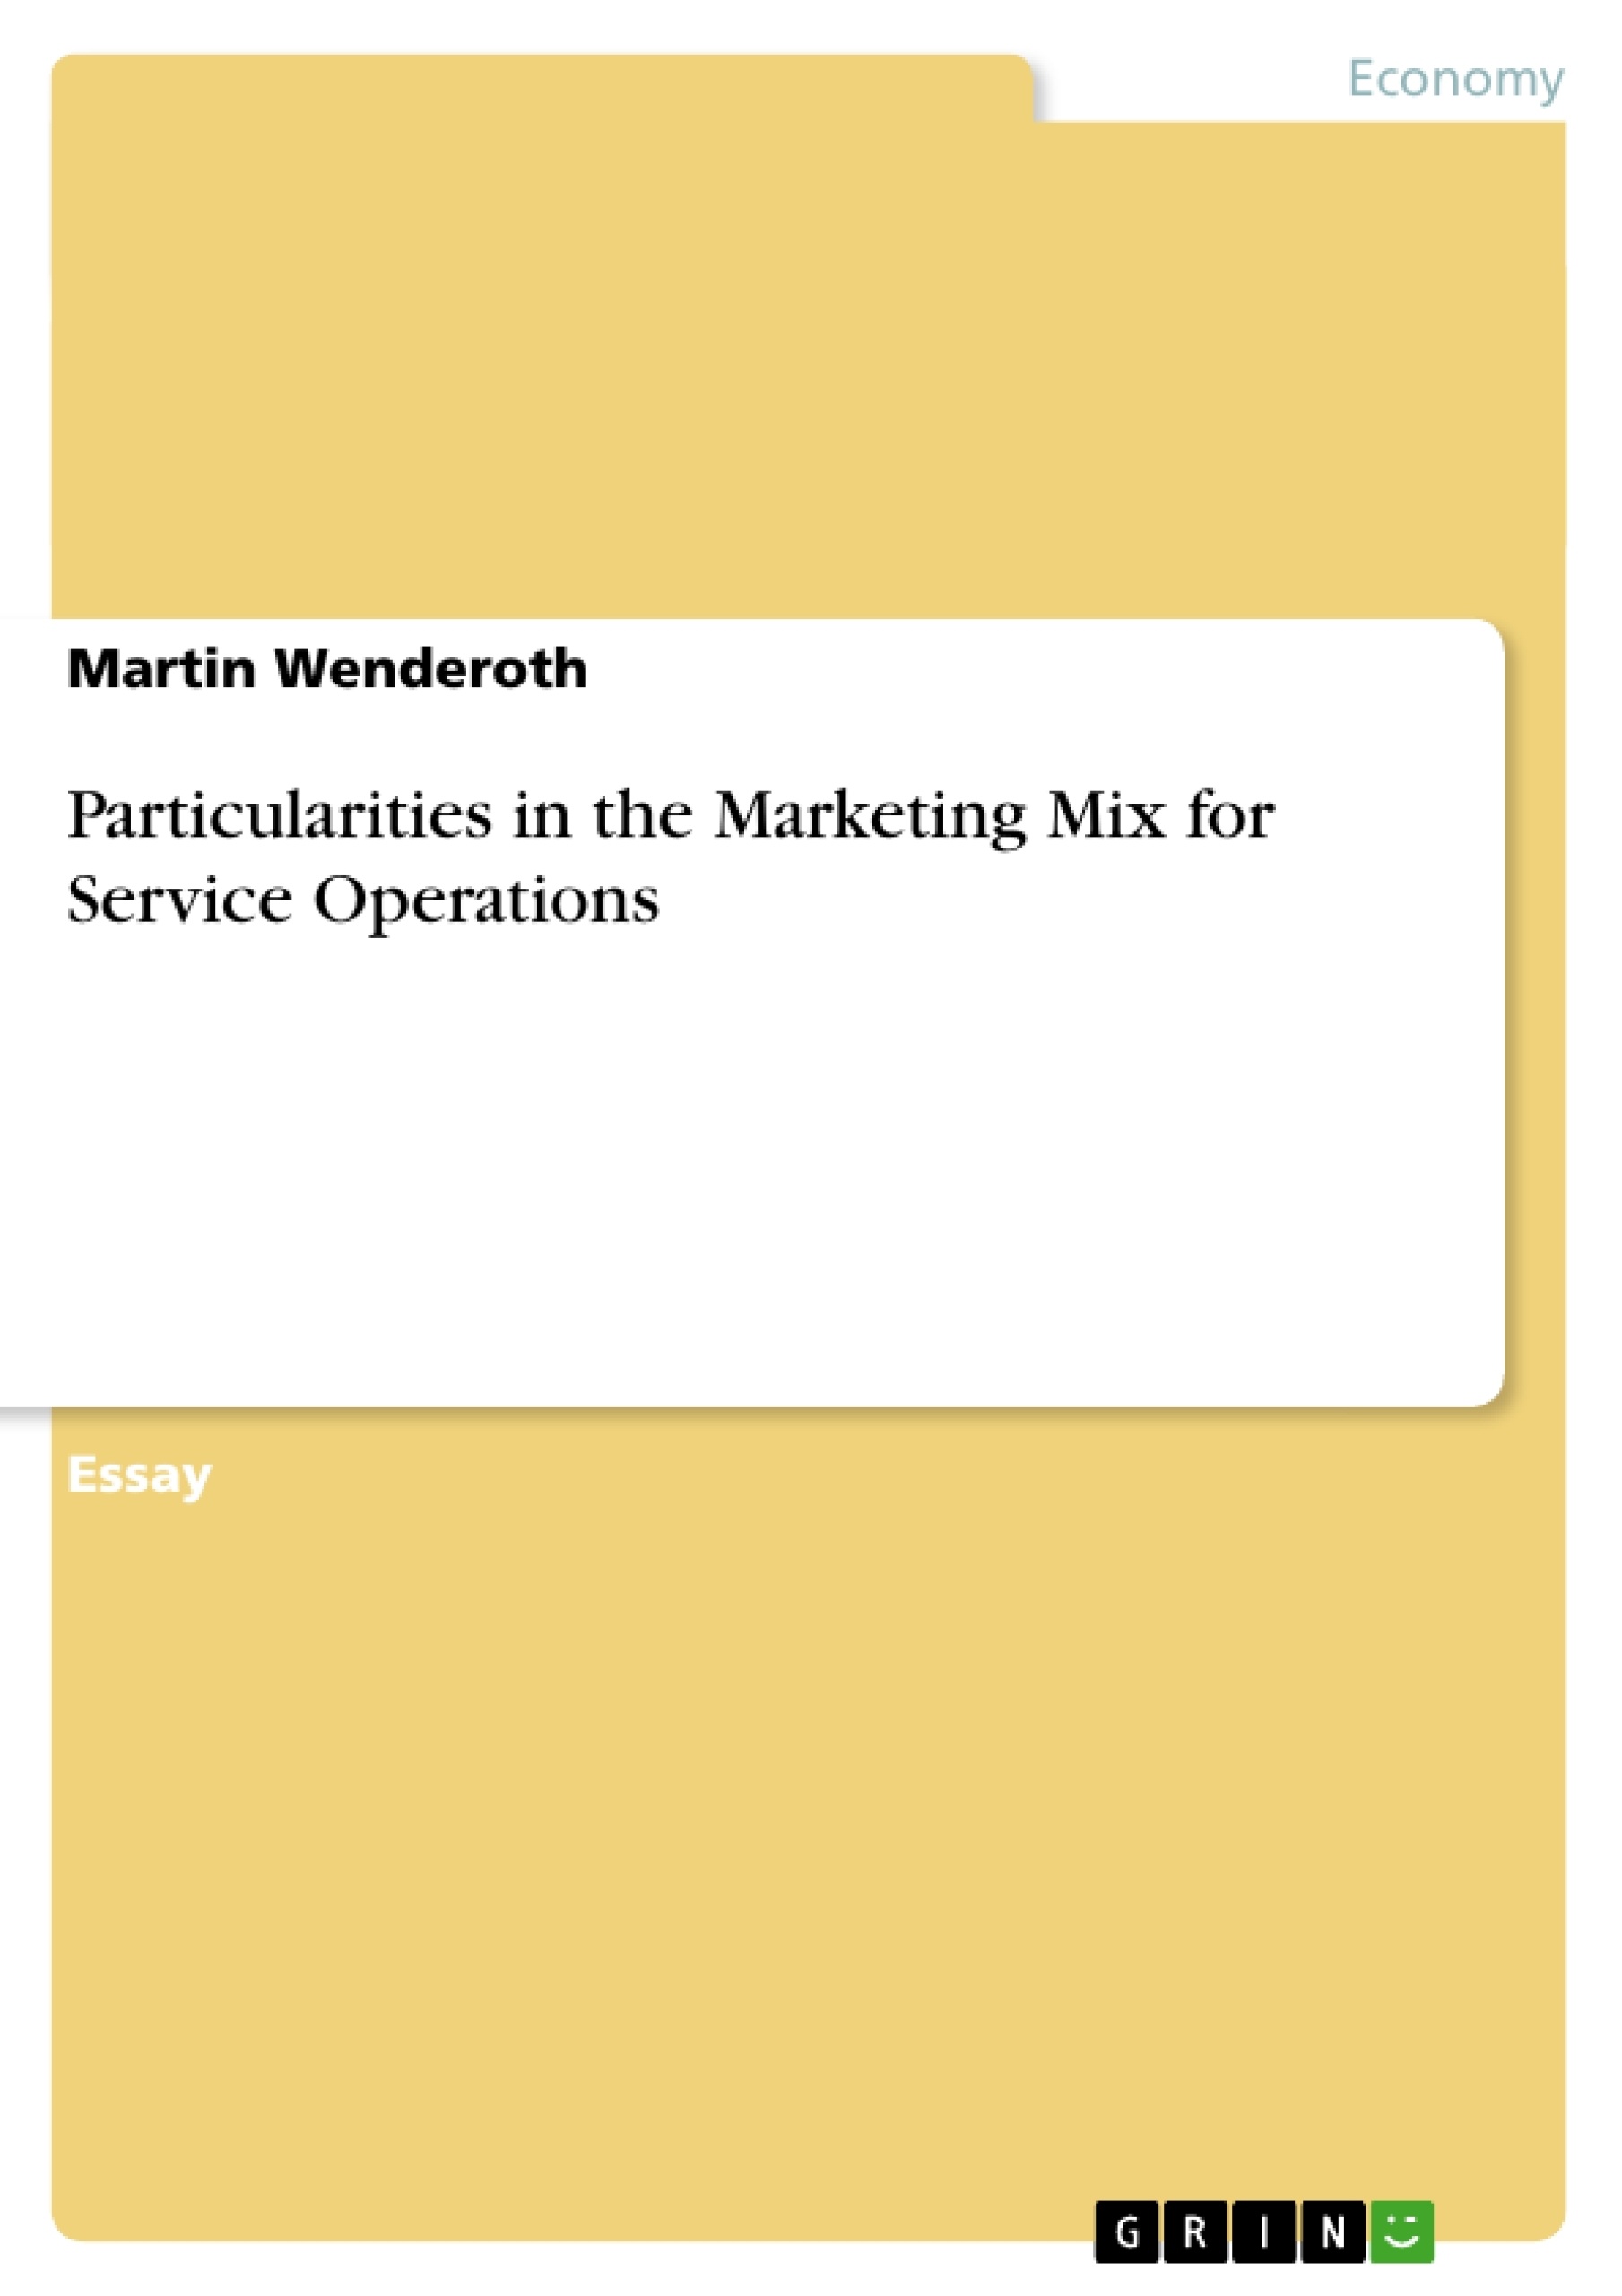 Title: Particularities in the Marketing Mix for Service Operations